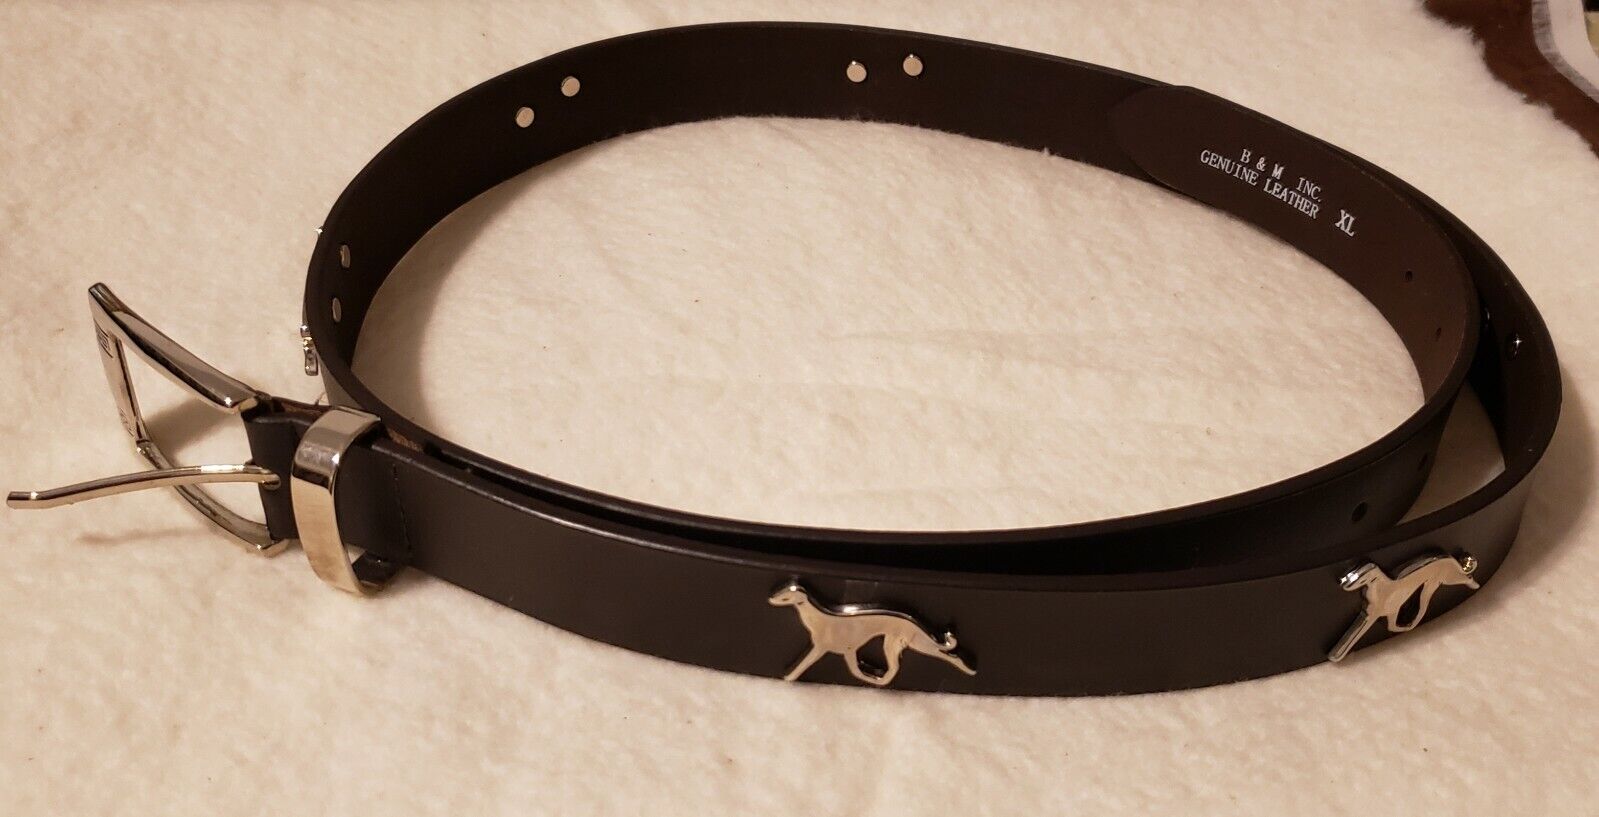 Greyhound Whippet Leather Belt  XL  Brown with Silver Dogs